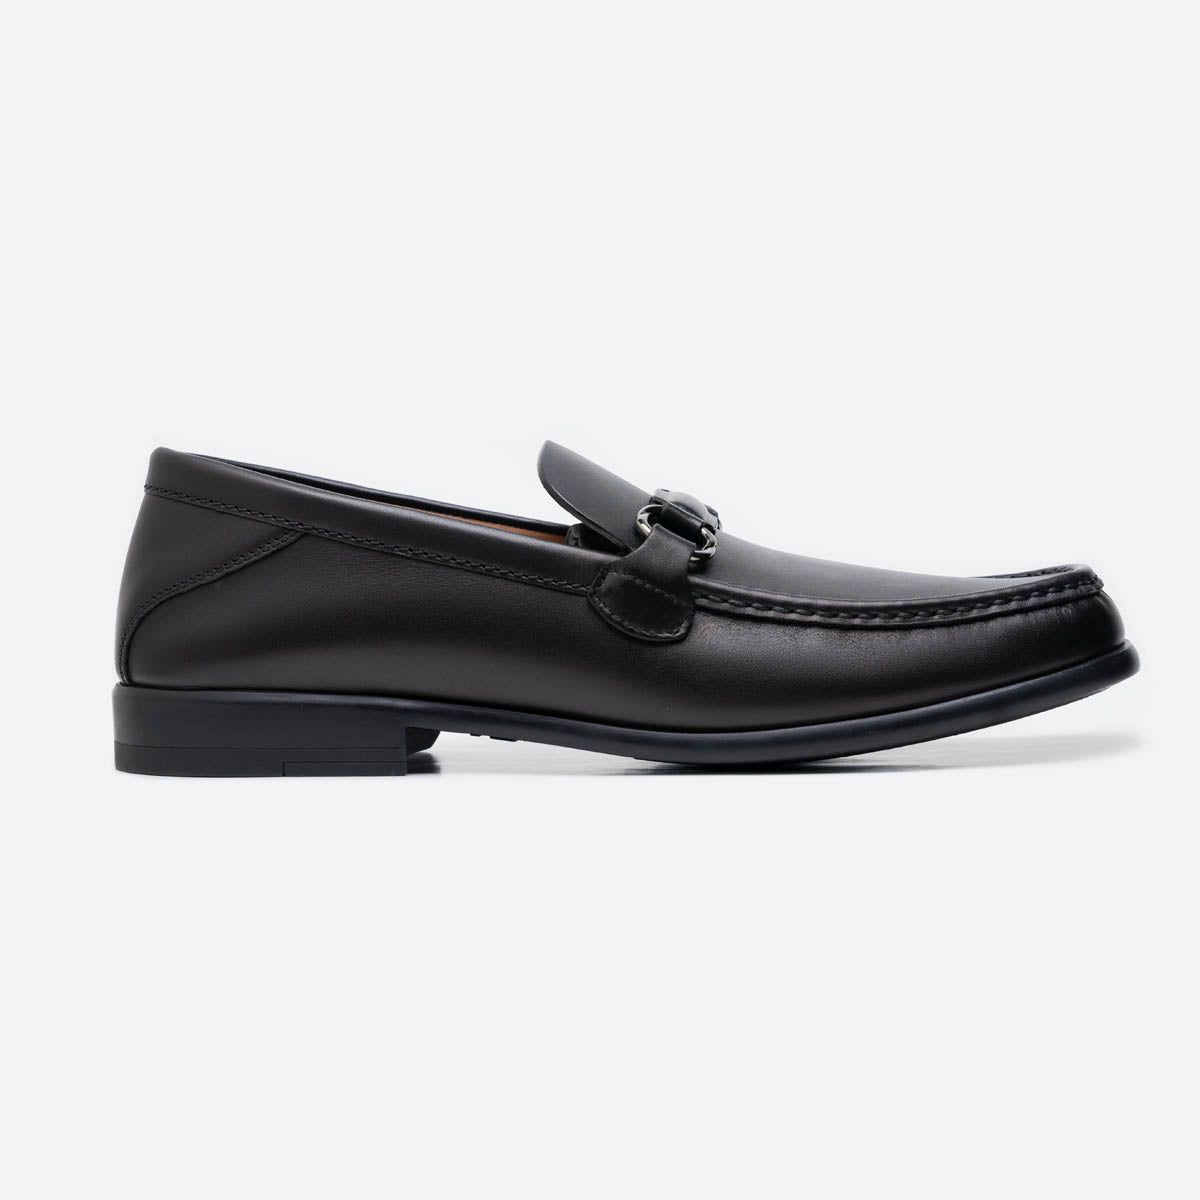 A5086Z LHMSF 1 NER BLK SLD ZEGNA SHOES